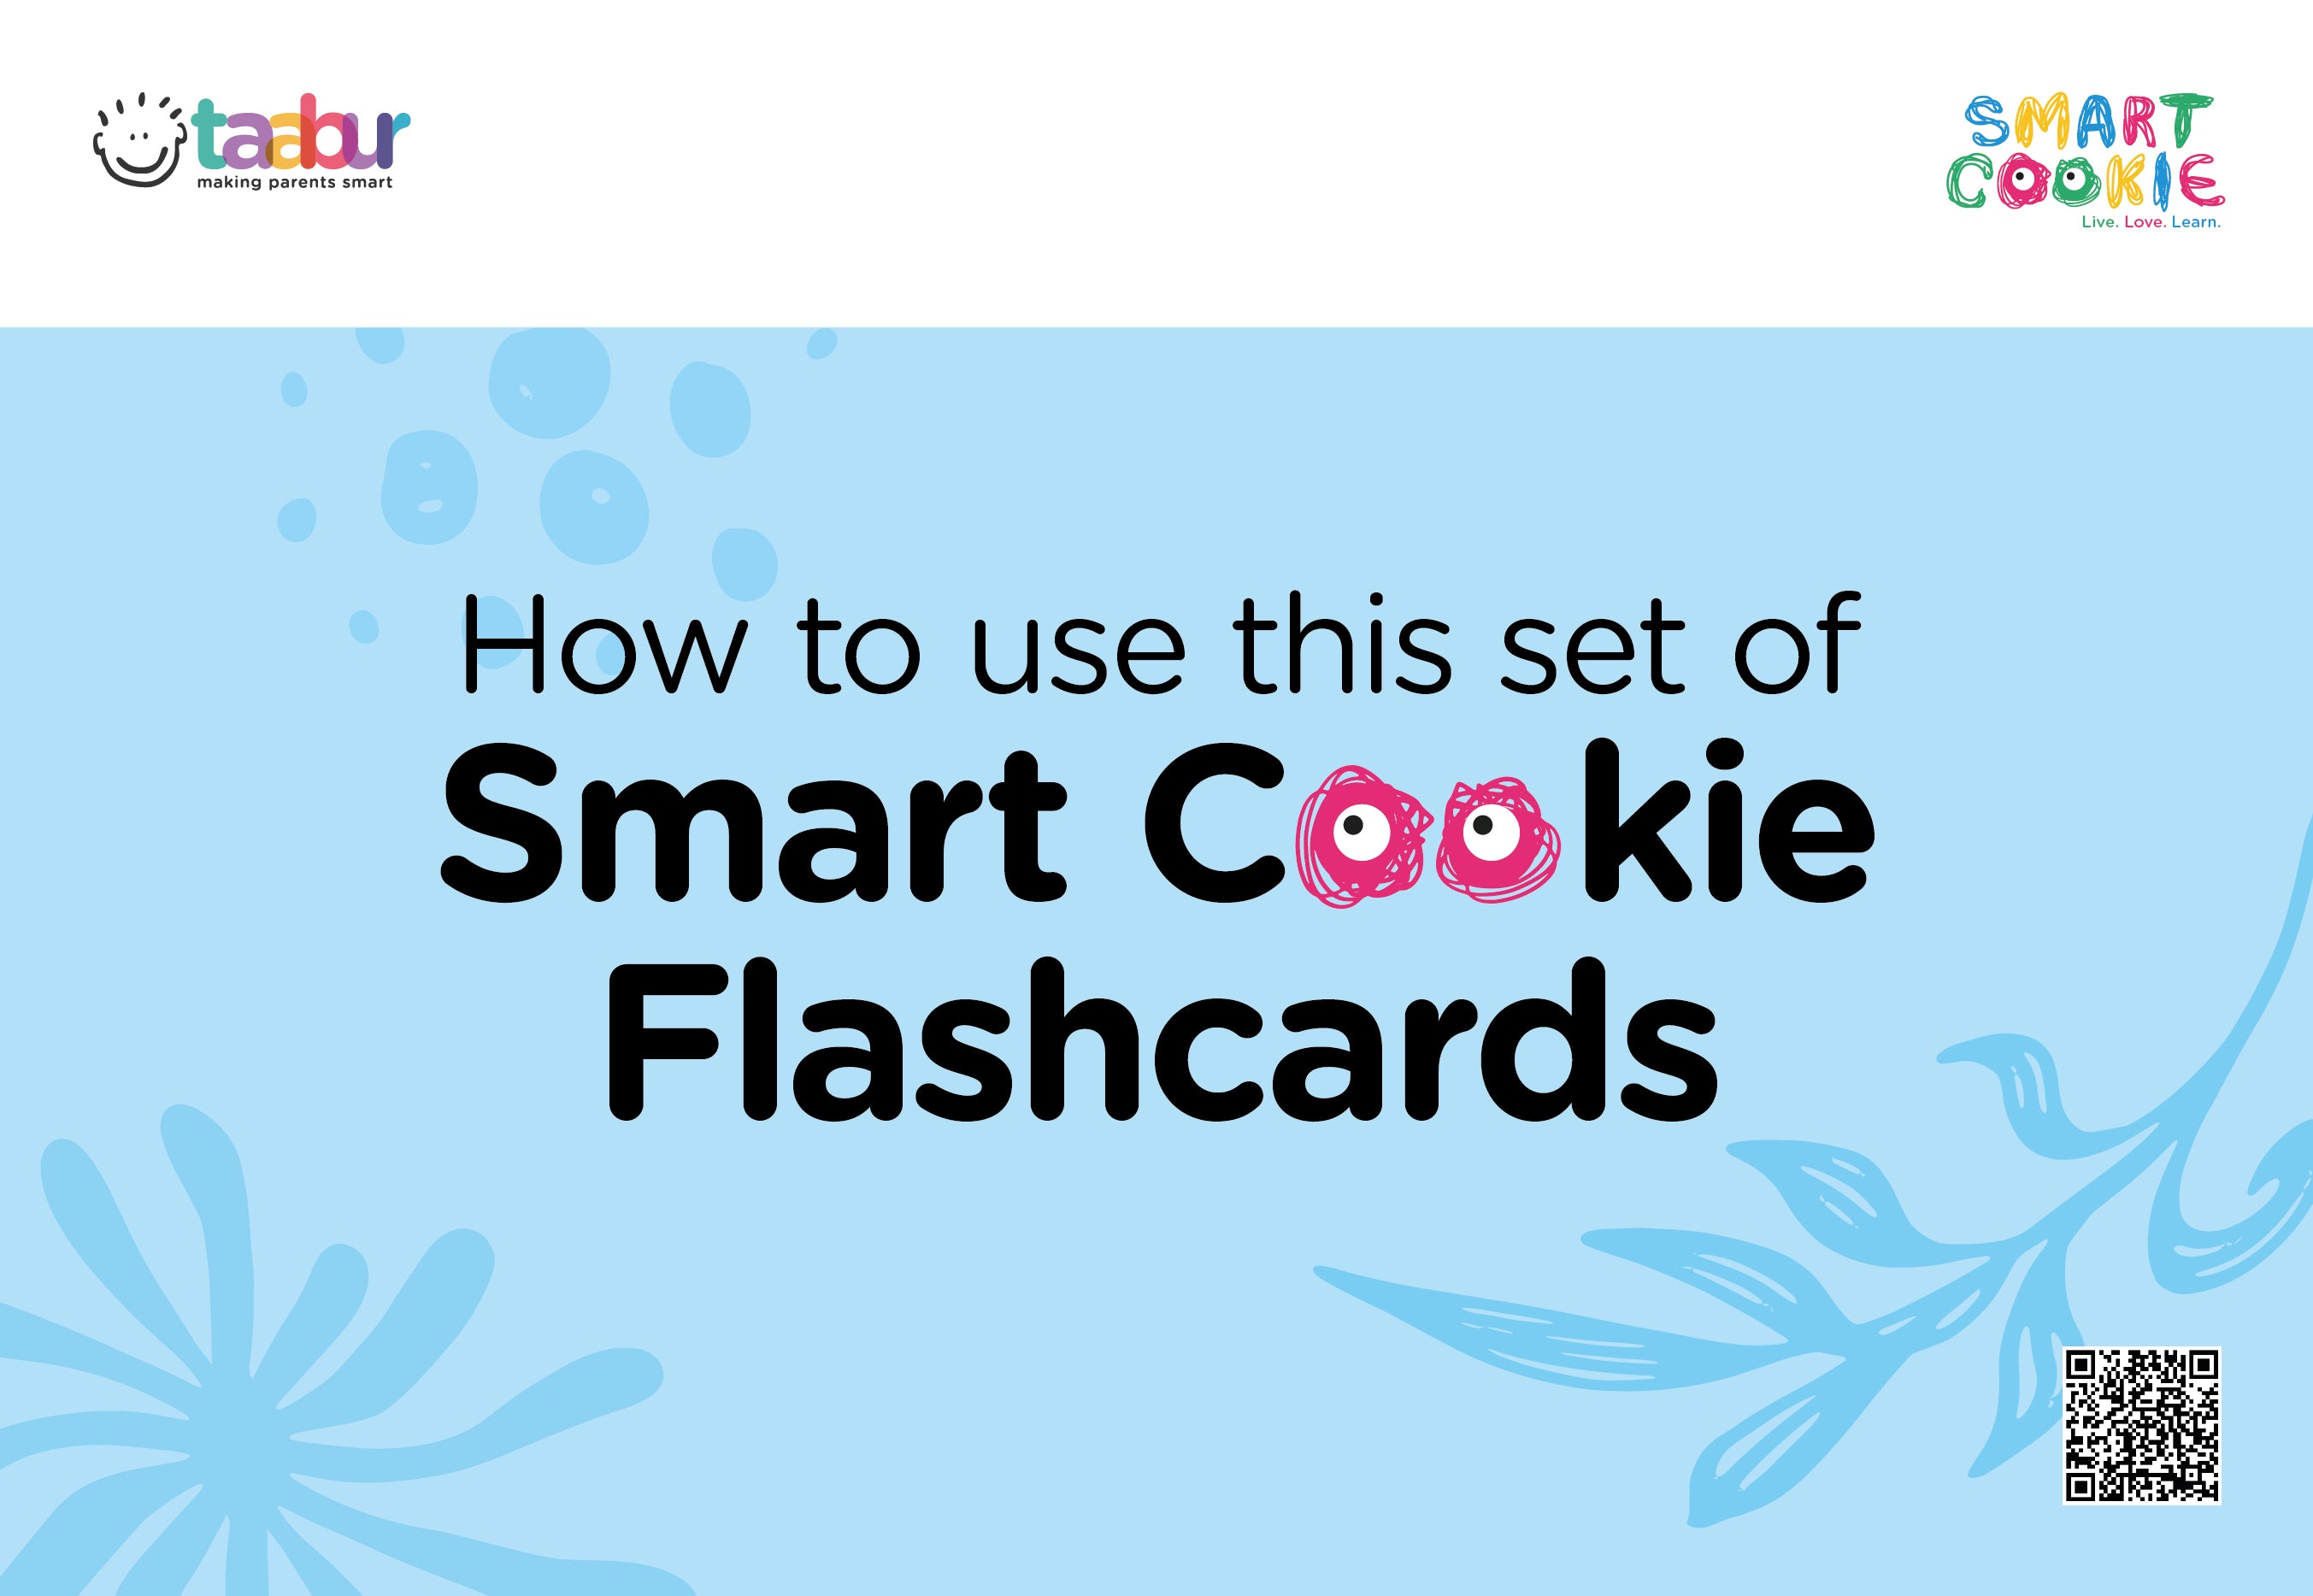 Electrical Equipment (Home) - Interactive Flash Cards for Children (12 Cards) - for Kids Aged 2 to 4 Years Old